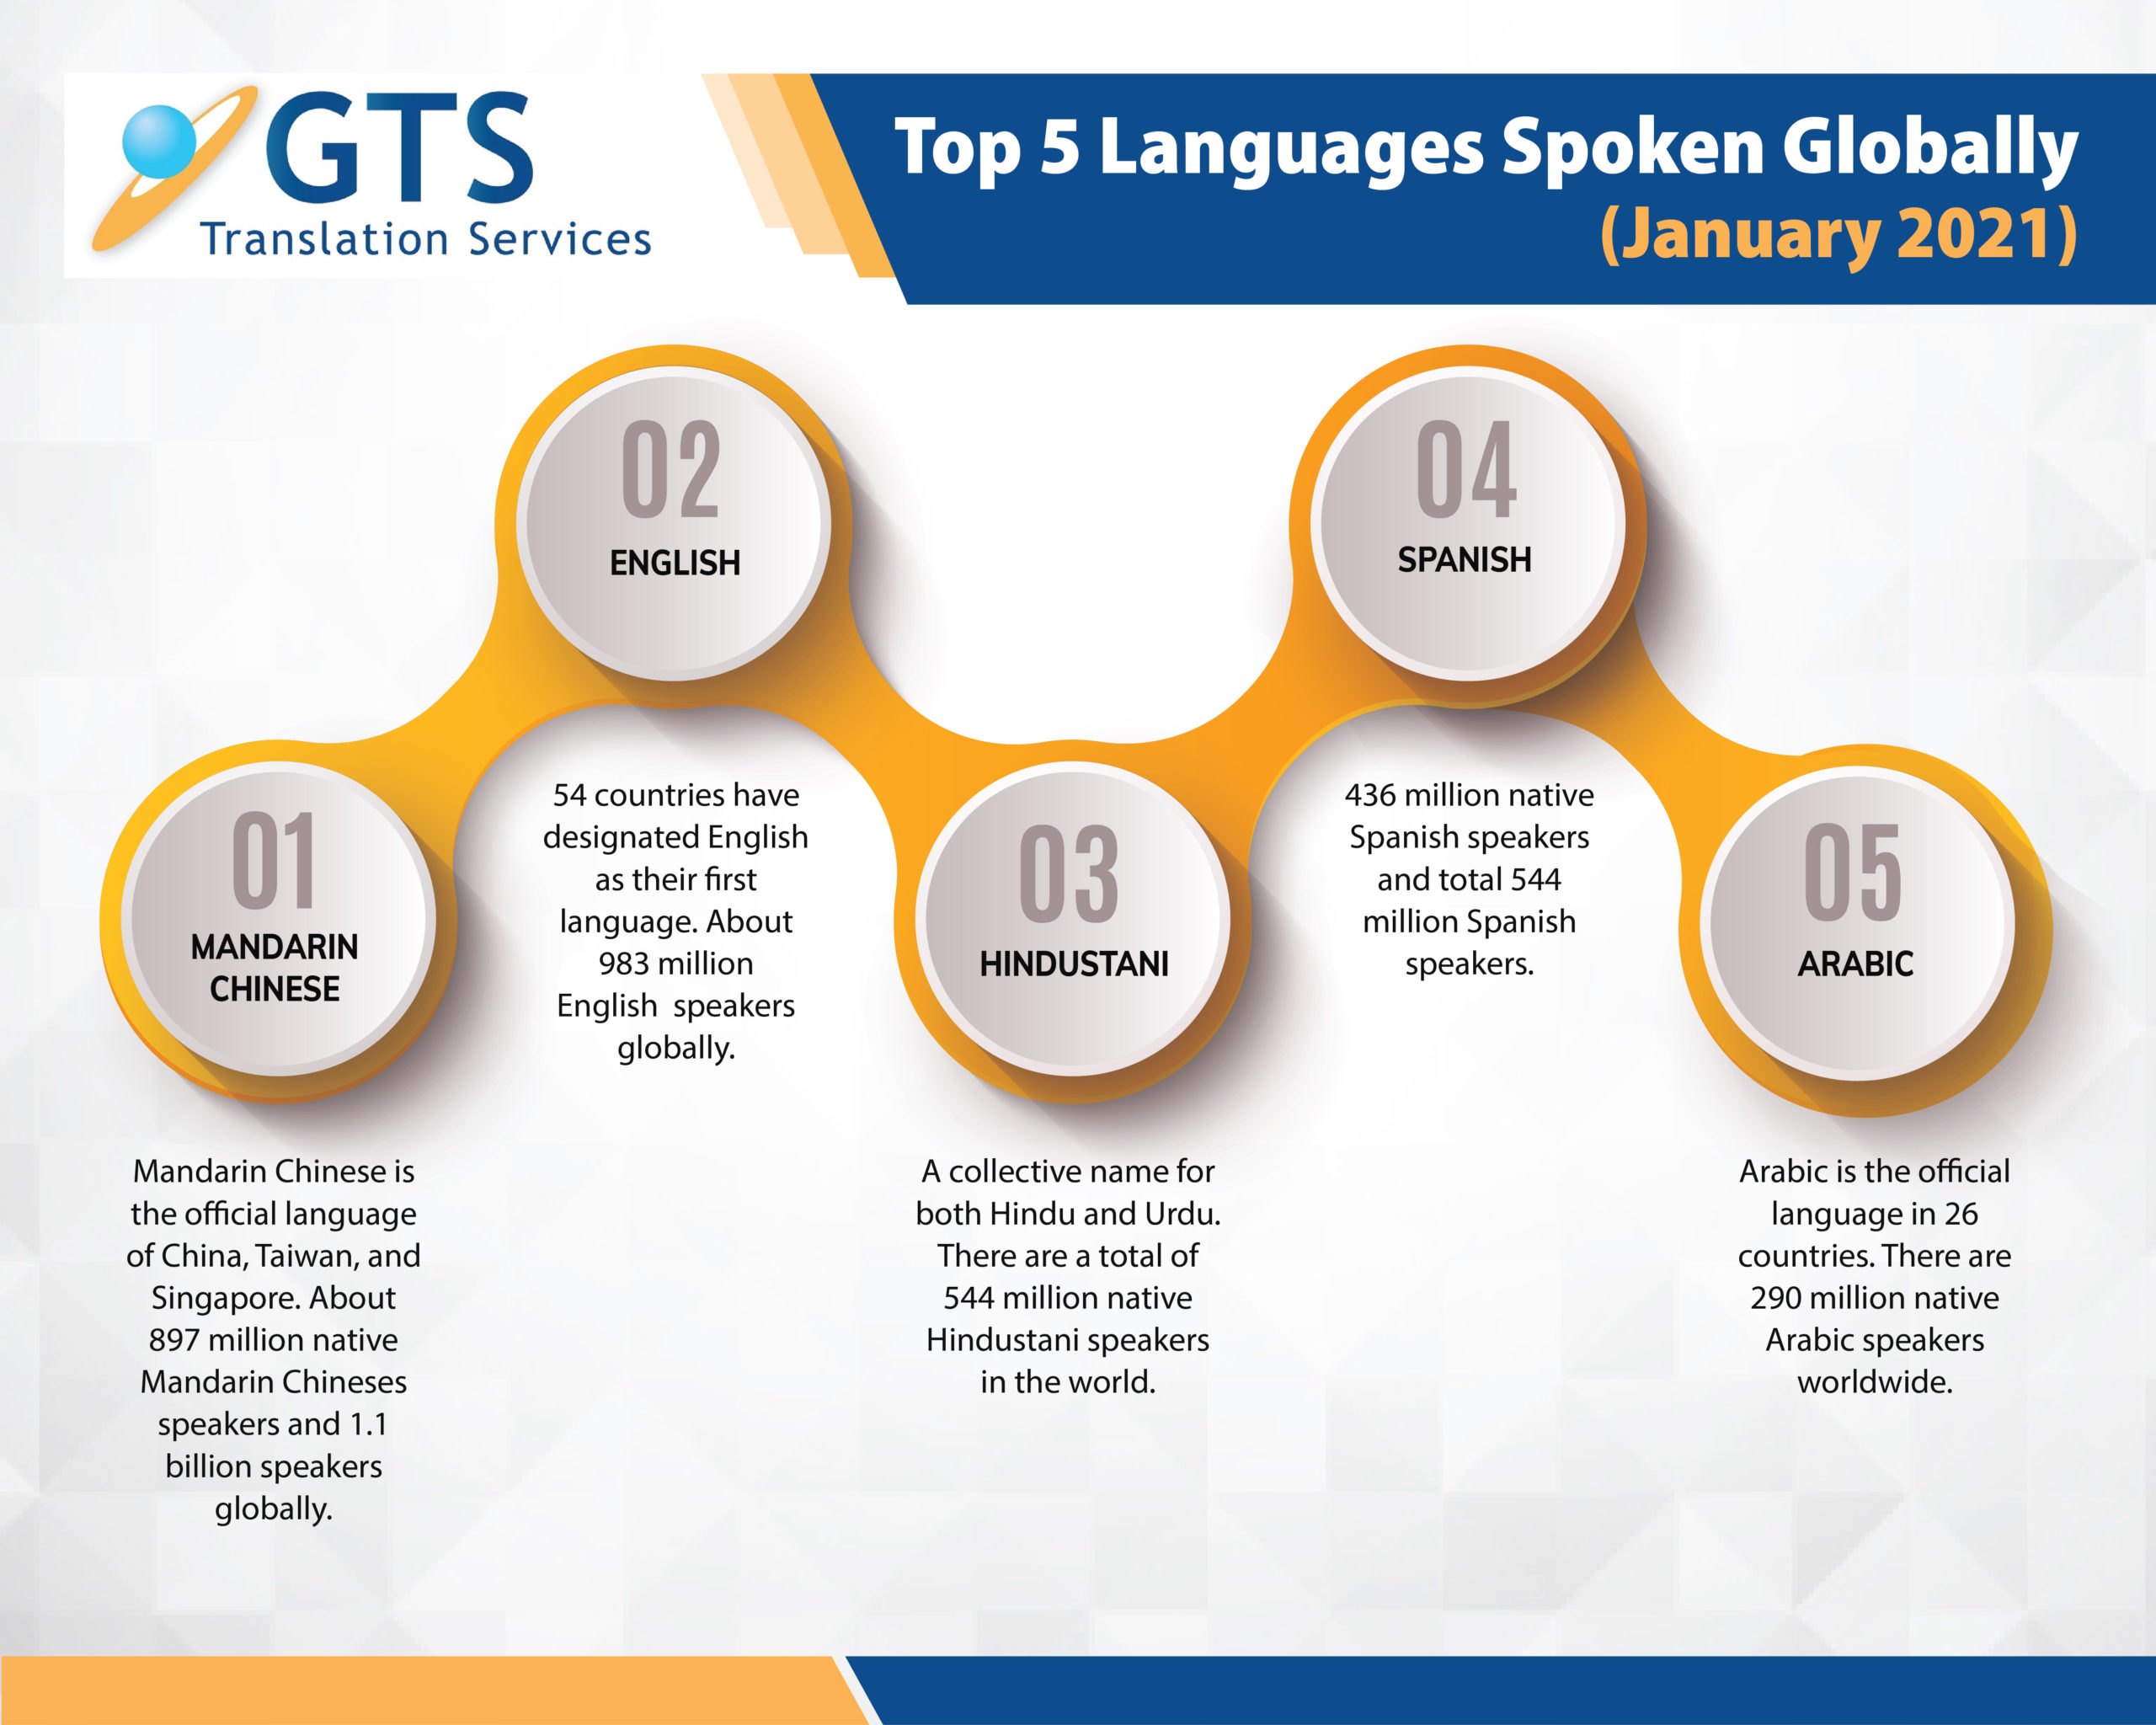 5 Top Languages Spoken Globally in 2021 - GTS Blog